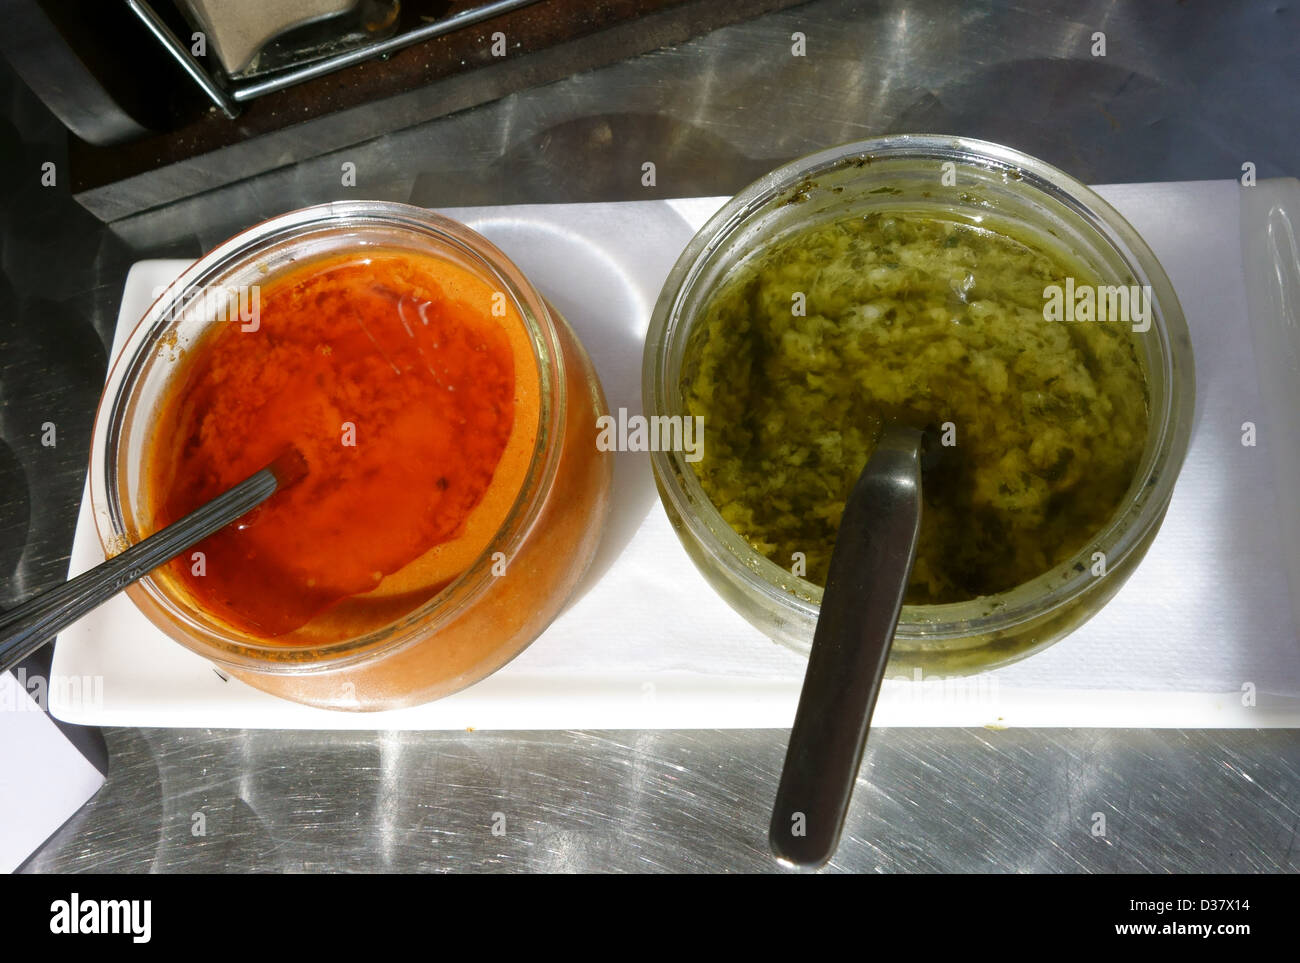 Typical red and green mojo dips to accompany food in Tenerife, Canary Islands, Spain Stock Photo